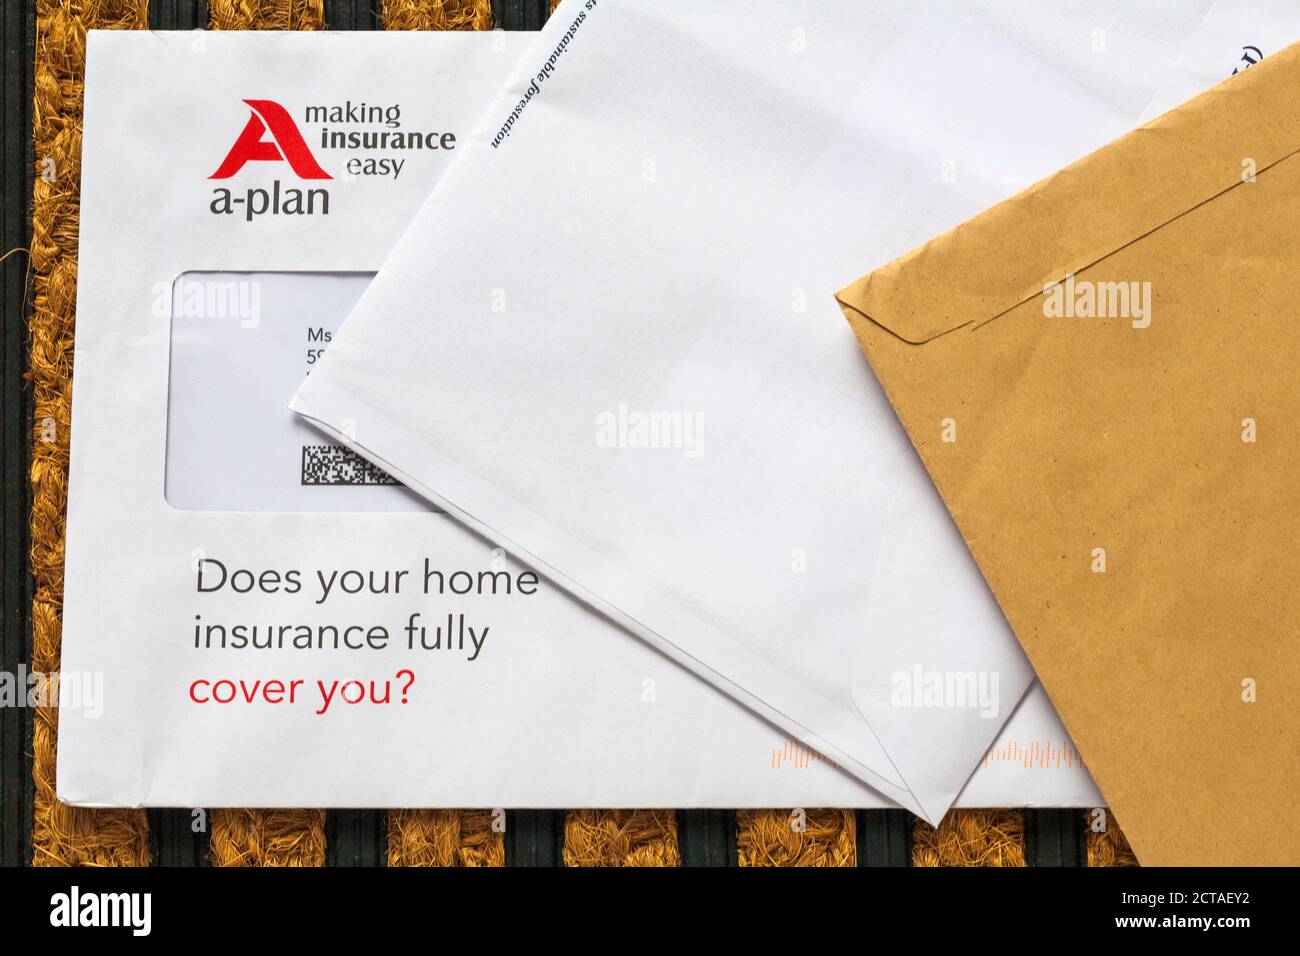 unsolicited mail junk mail on doormat - A-plan making insurance easy, does your home insurance fully cover you? Stock Photo